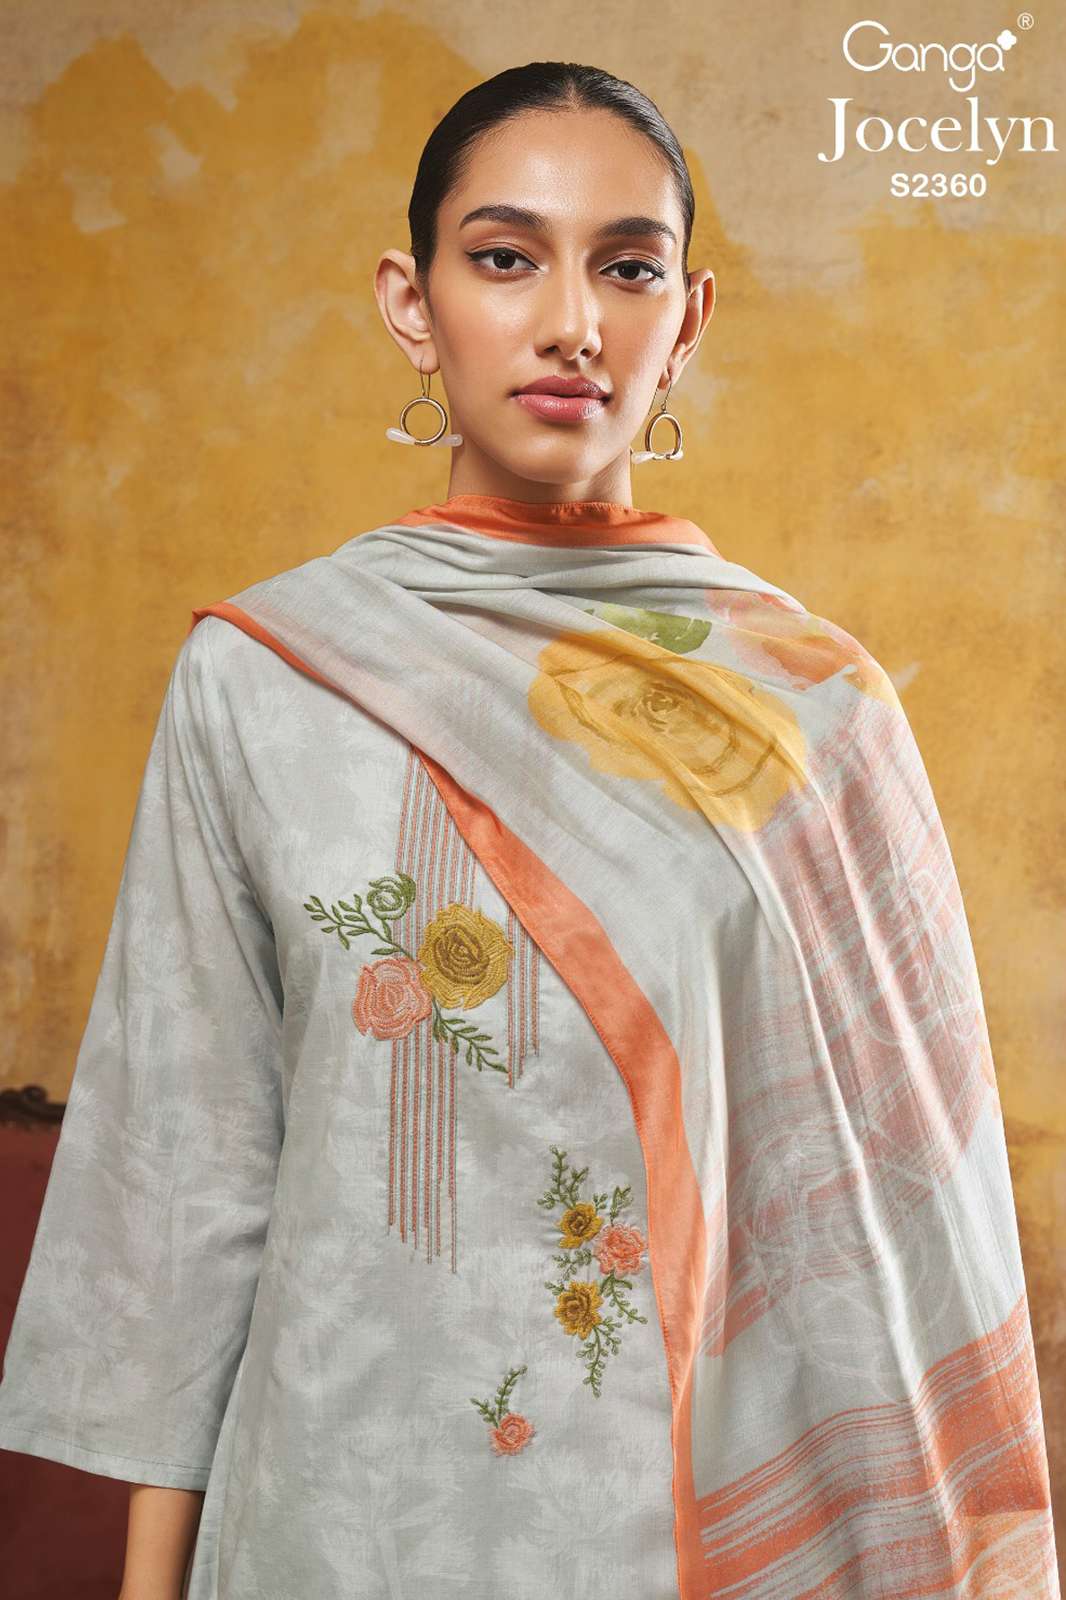 Ganga Jocelyn 2360 COTTON PRINTED WITH EMBROIDERY, & EMBROIDERY, LACE ON DAMAN SUIT